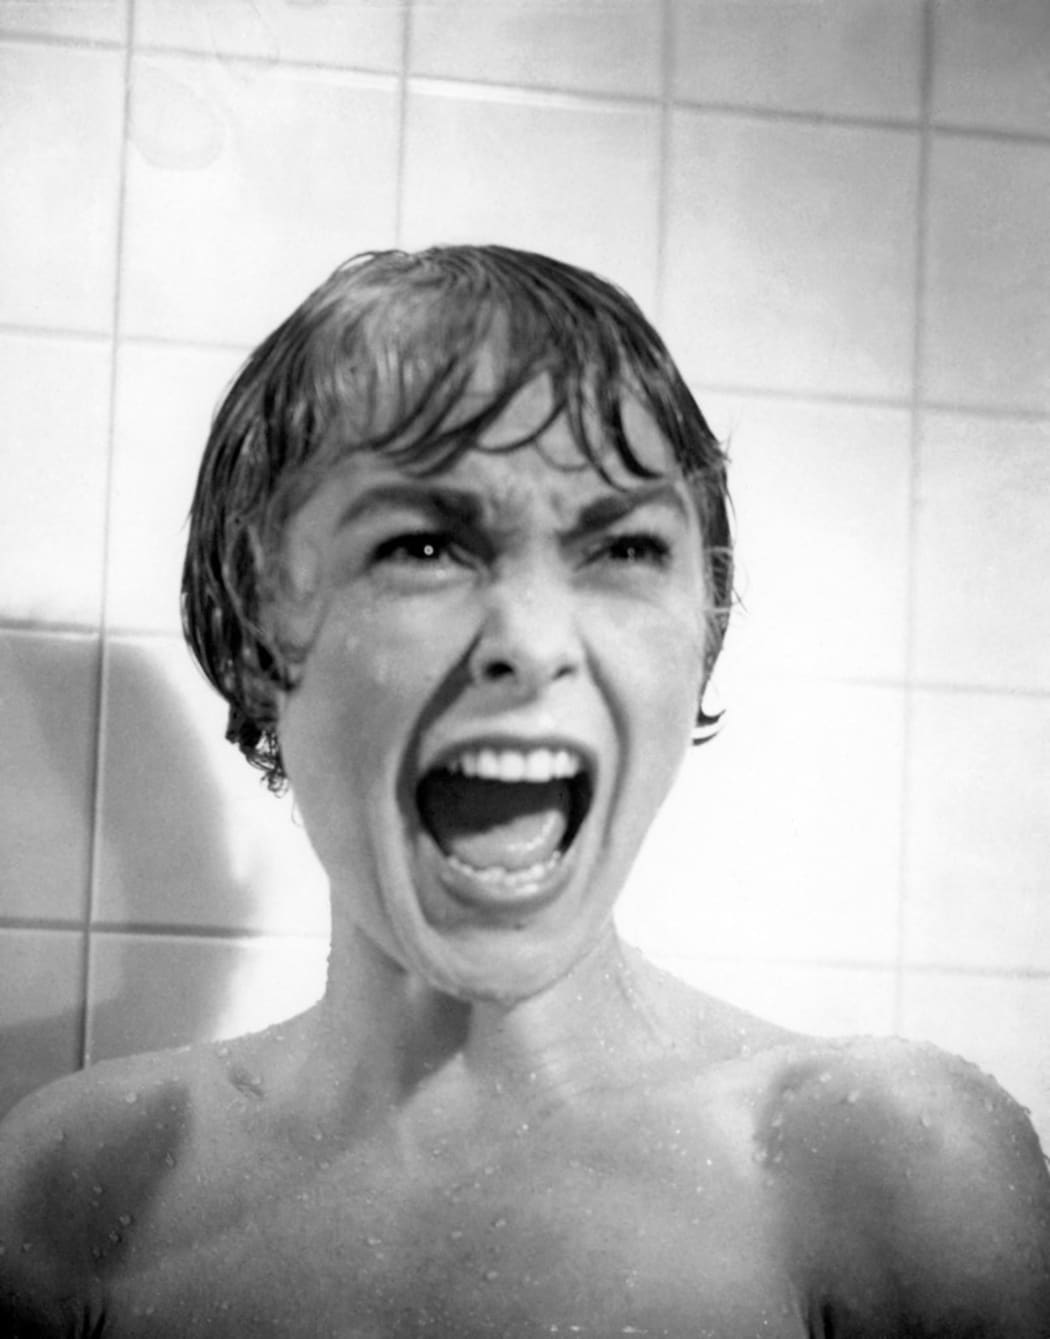 Psychose
Psycho
1960
Real  Alfred Hitchcock
Janet Leigh.
Collection Christophel / RnB © Shamley Productions (Photo by Shamley Productions / Collection Christophel / Collection ChristopheL via AFP)